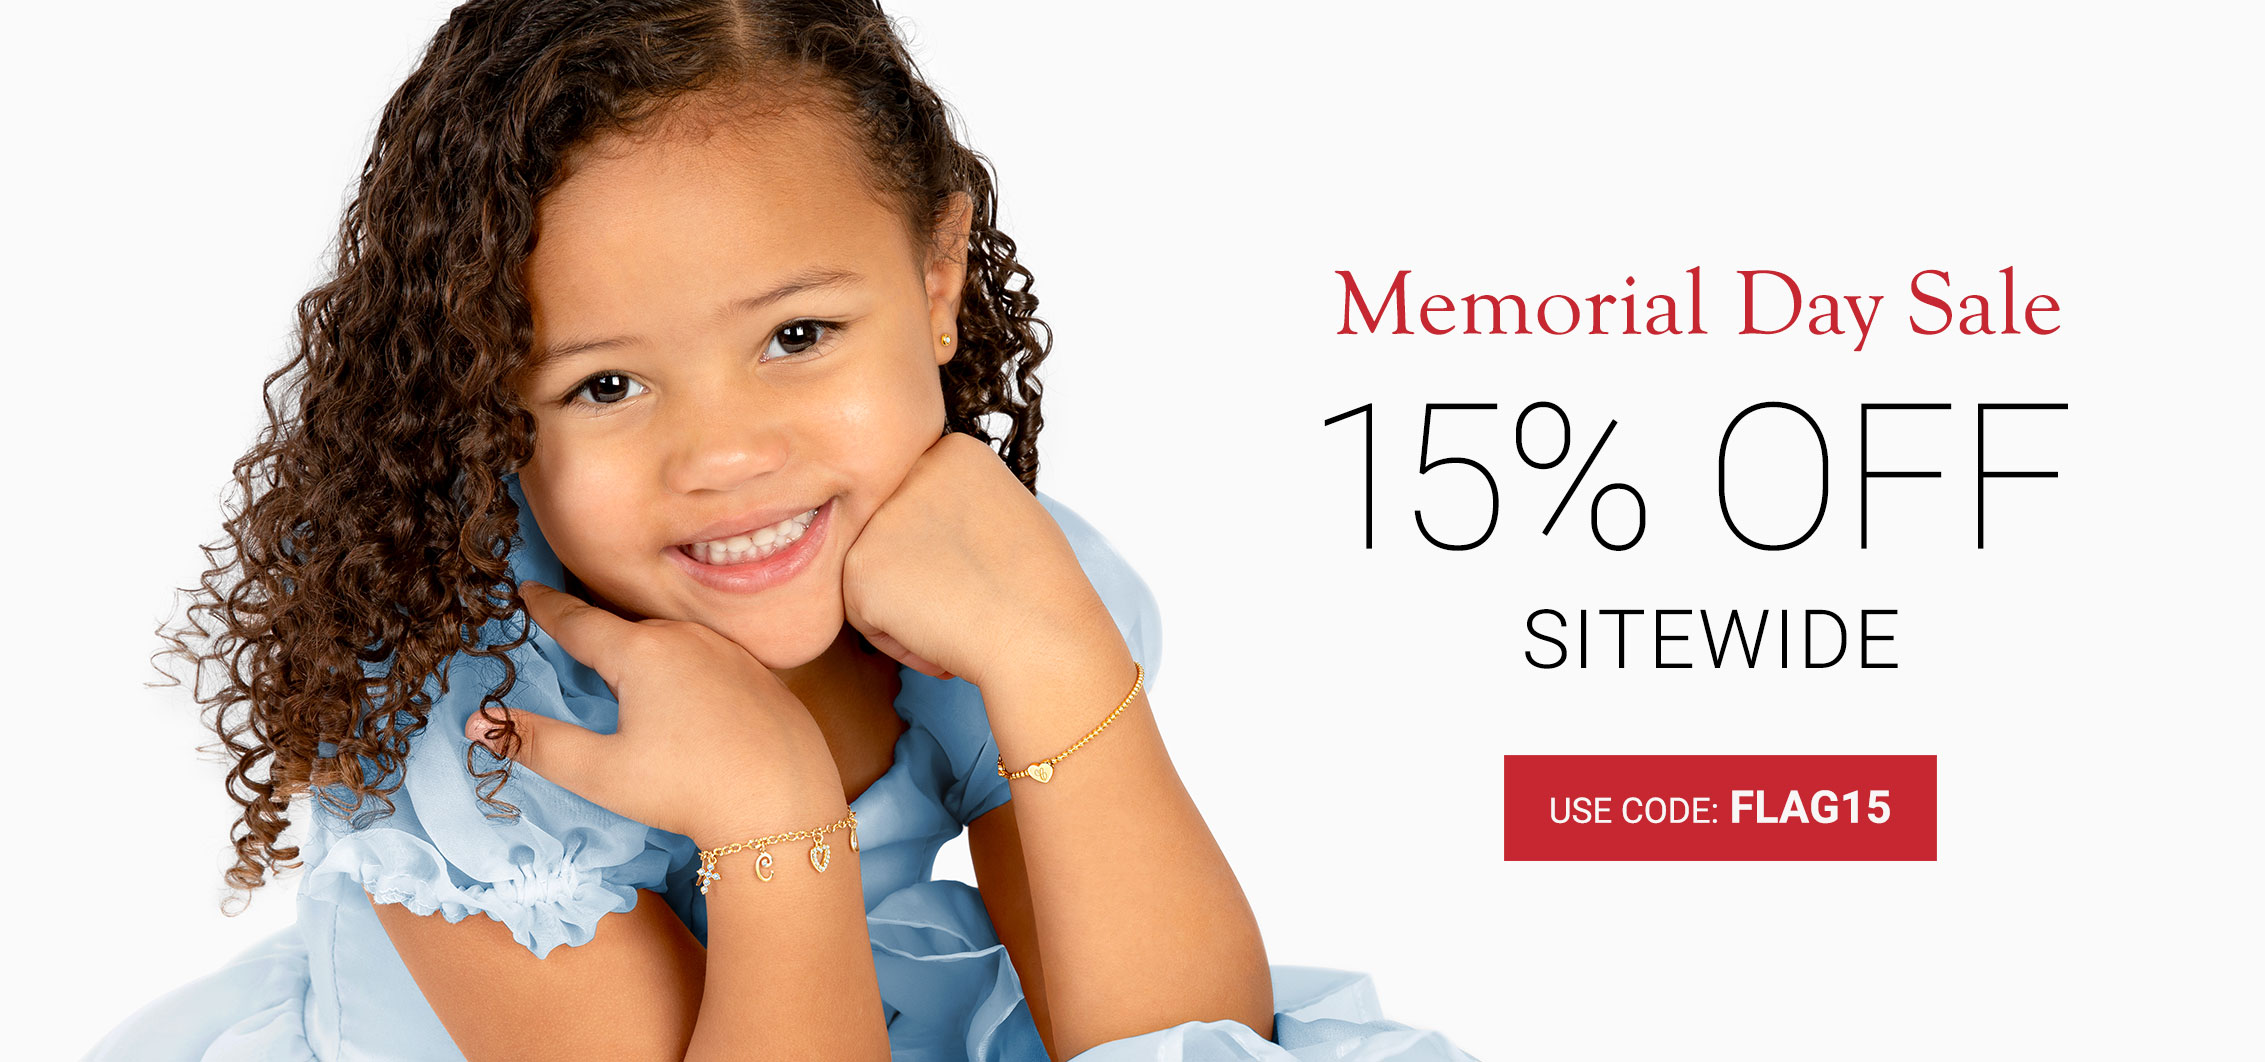 Jewelry Designed Specifically for Baby, Kids, & Children for Memorial Day Sale